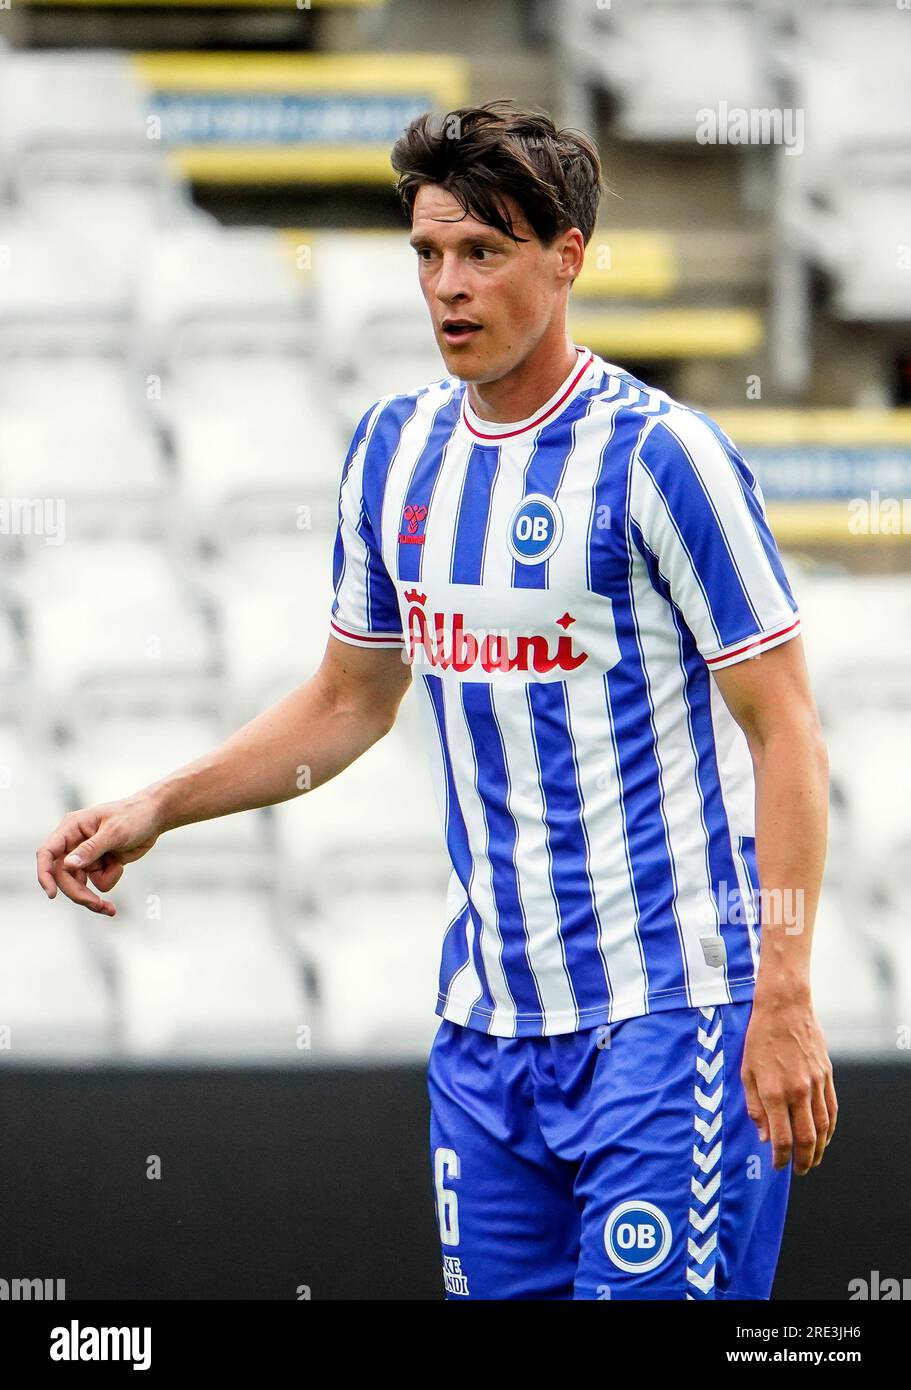 Odense, Denmark. 24th, July 2023. Sauli Vaisanen (16) of Odense BK seen during a test match between Odense BK and B.93 at Nature Energy Park in Odense. (Photo credit: Gonzales Photo - Kent Rasmussen). Stock Photo